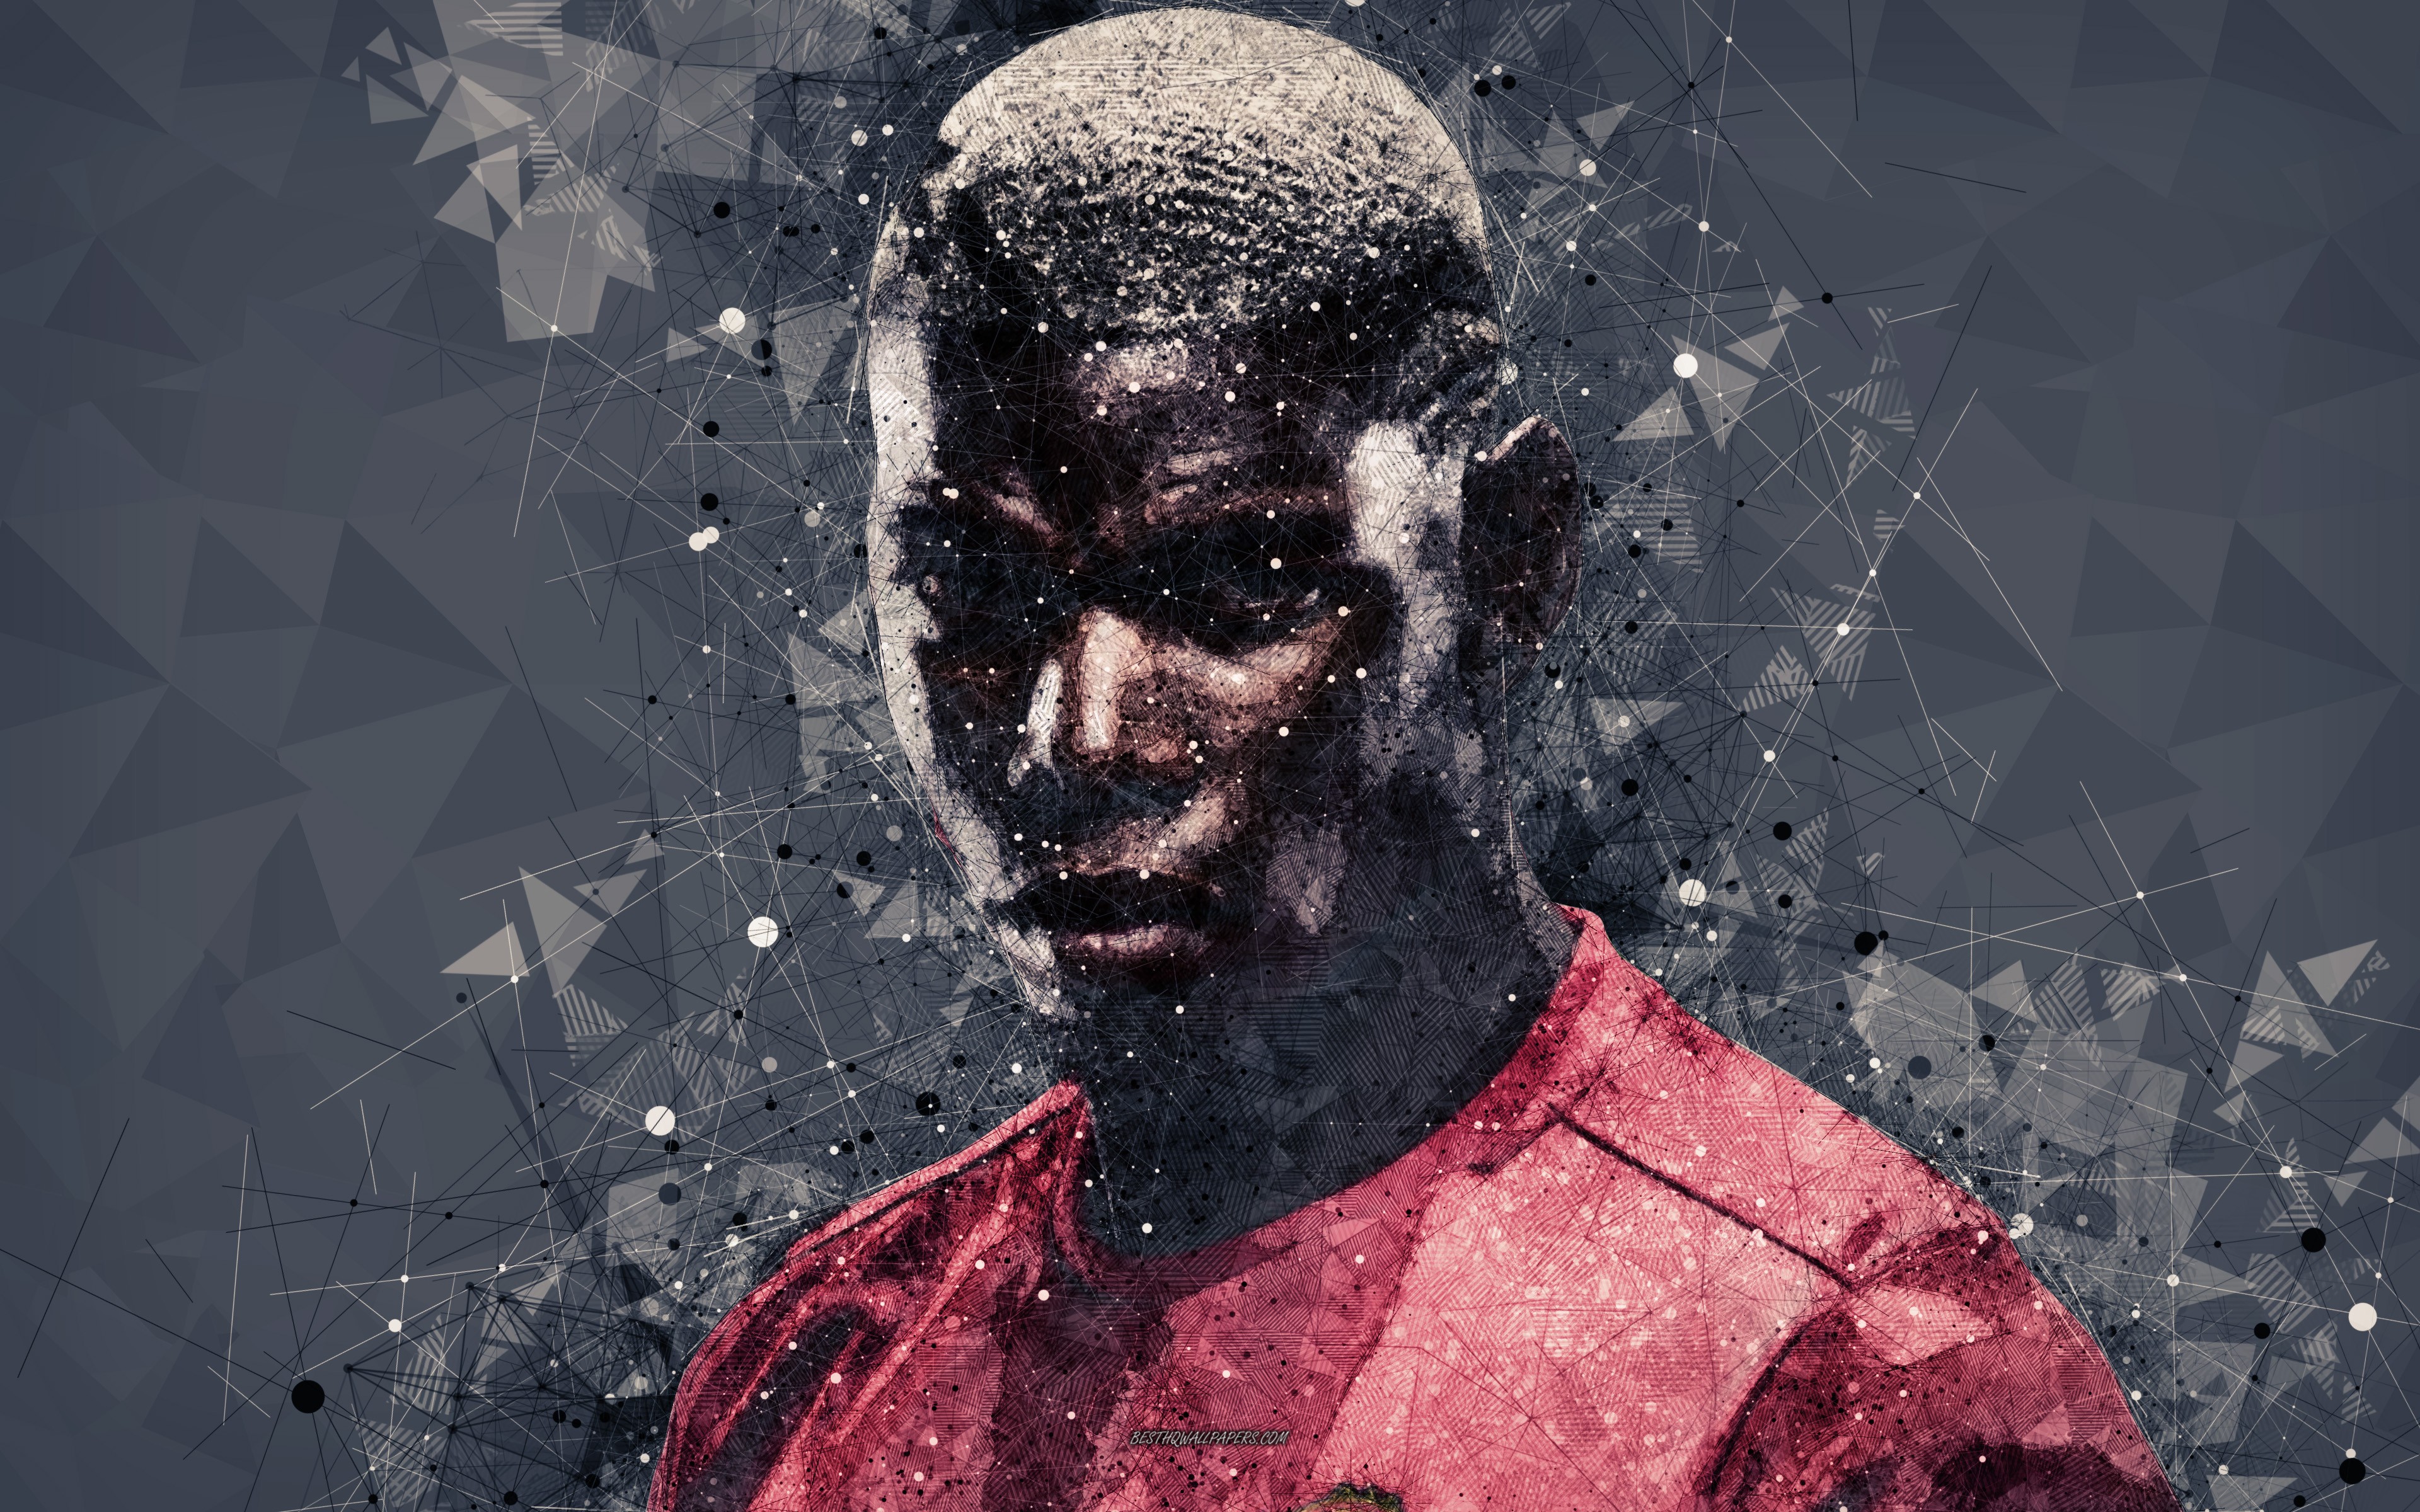 French Manchester United F C Paul Pogba Soccer 3840x2400